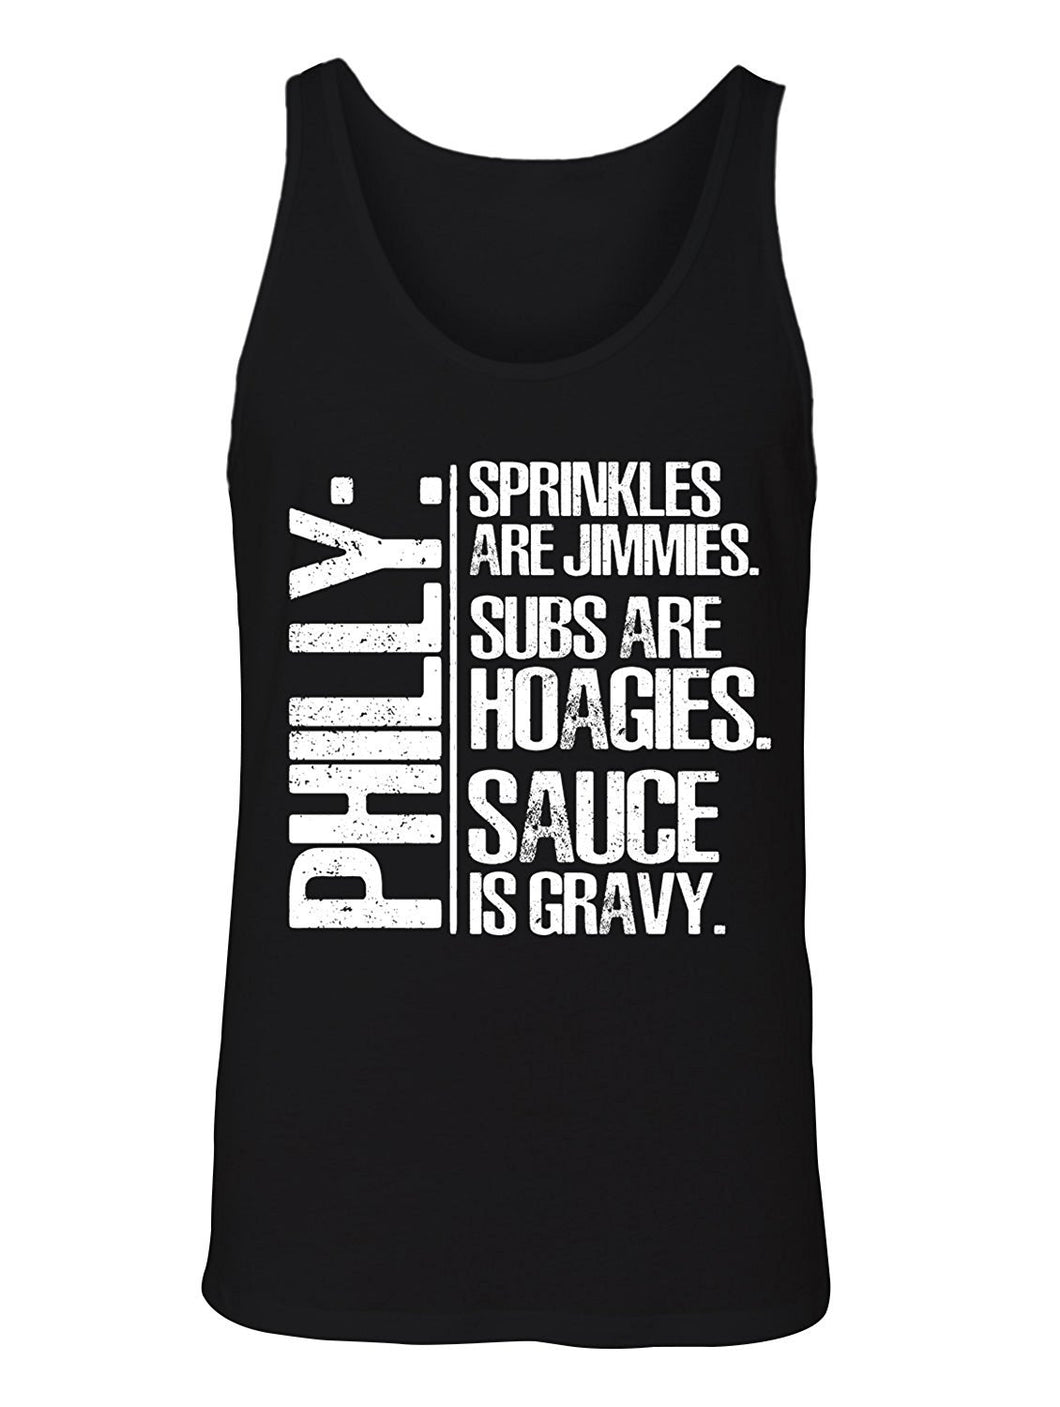 Manateez Men's Philly Slang Explained Tank Top